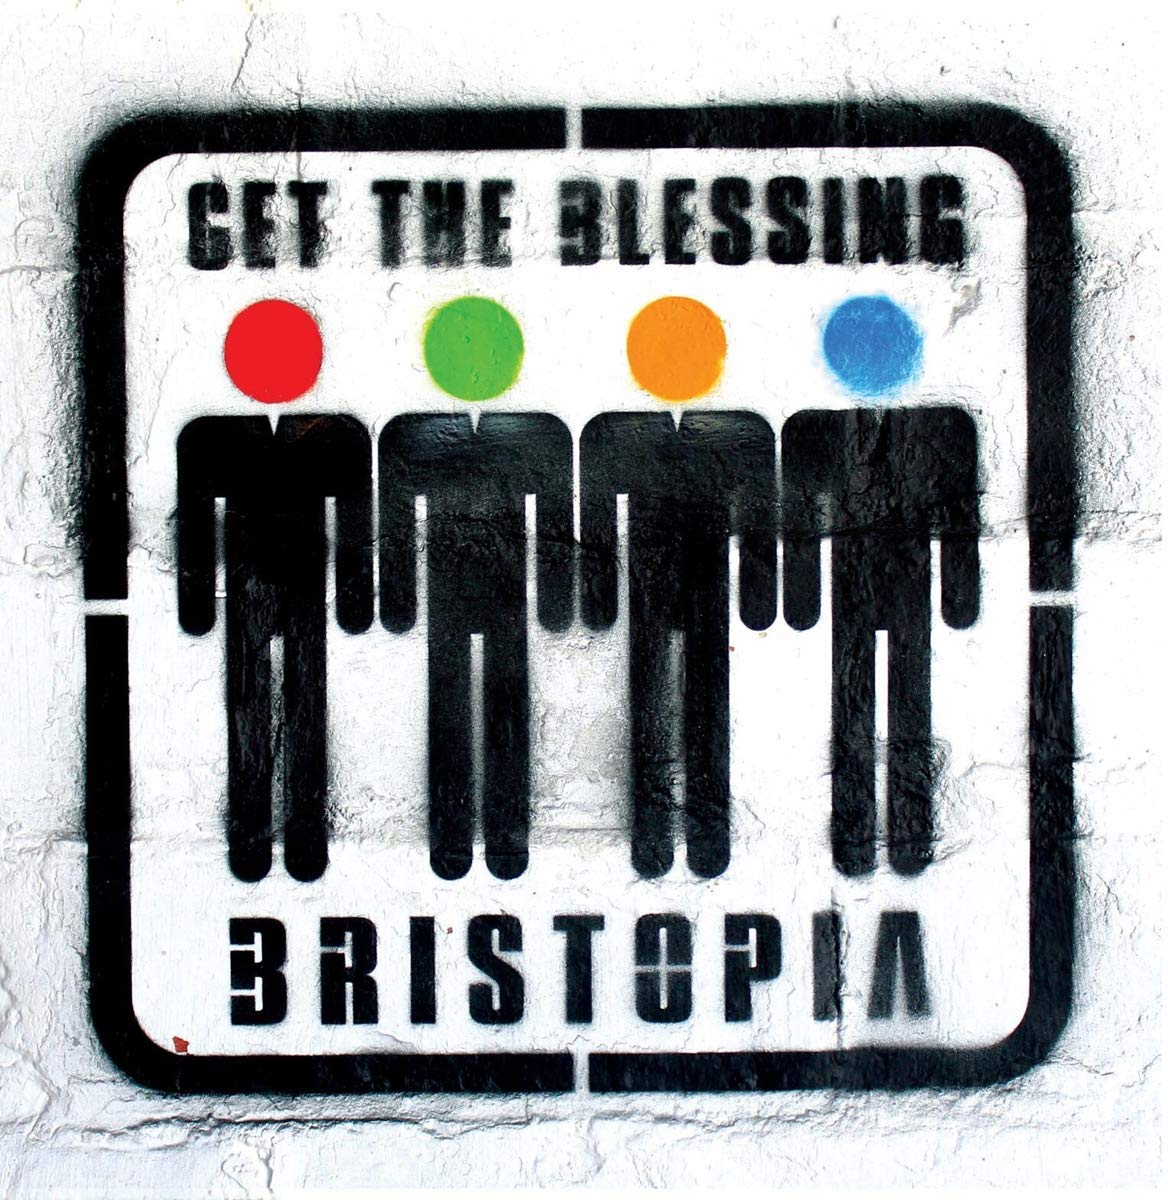 GET THE BLESSING - Bristopia cover 